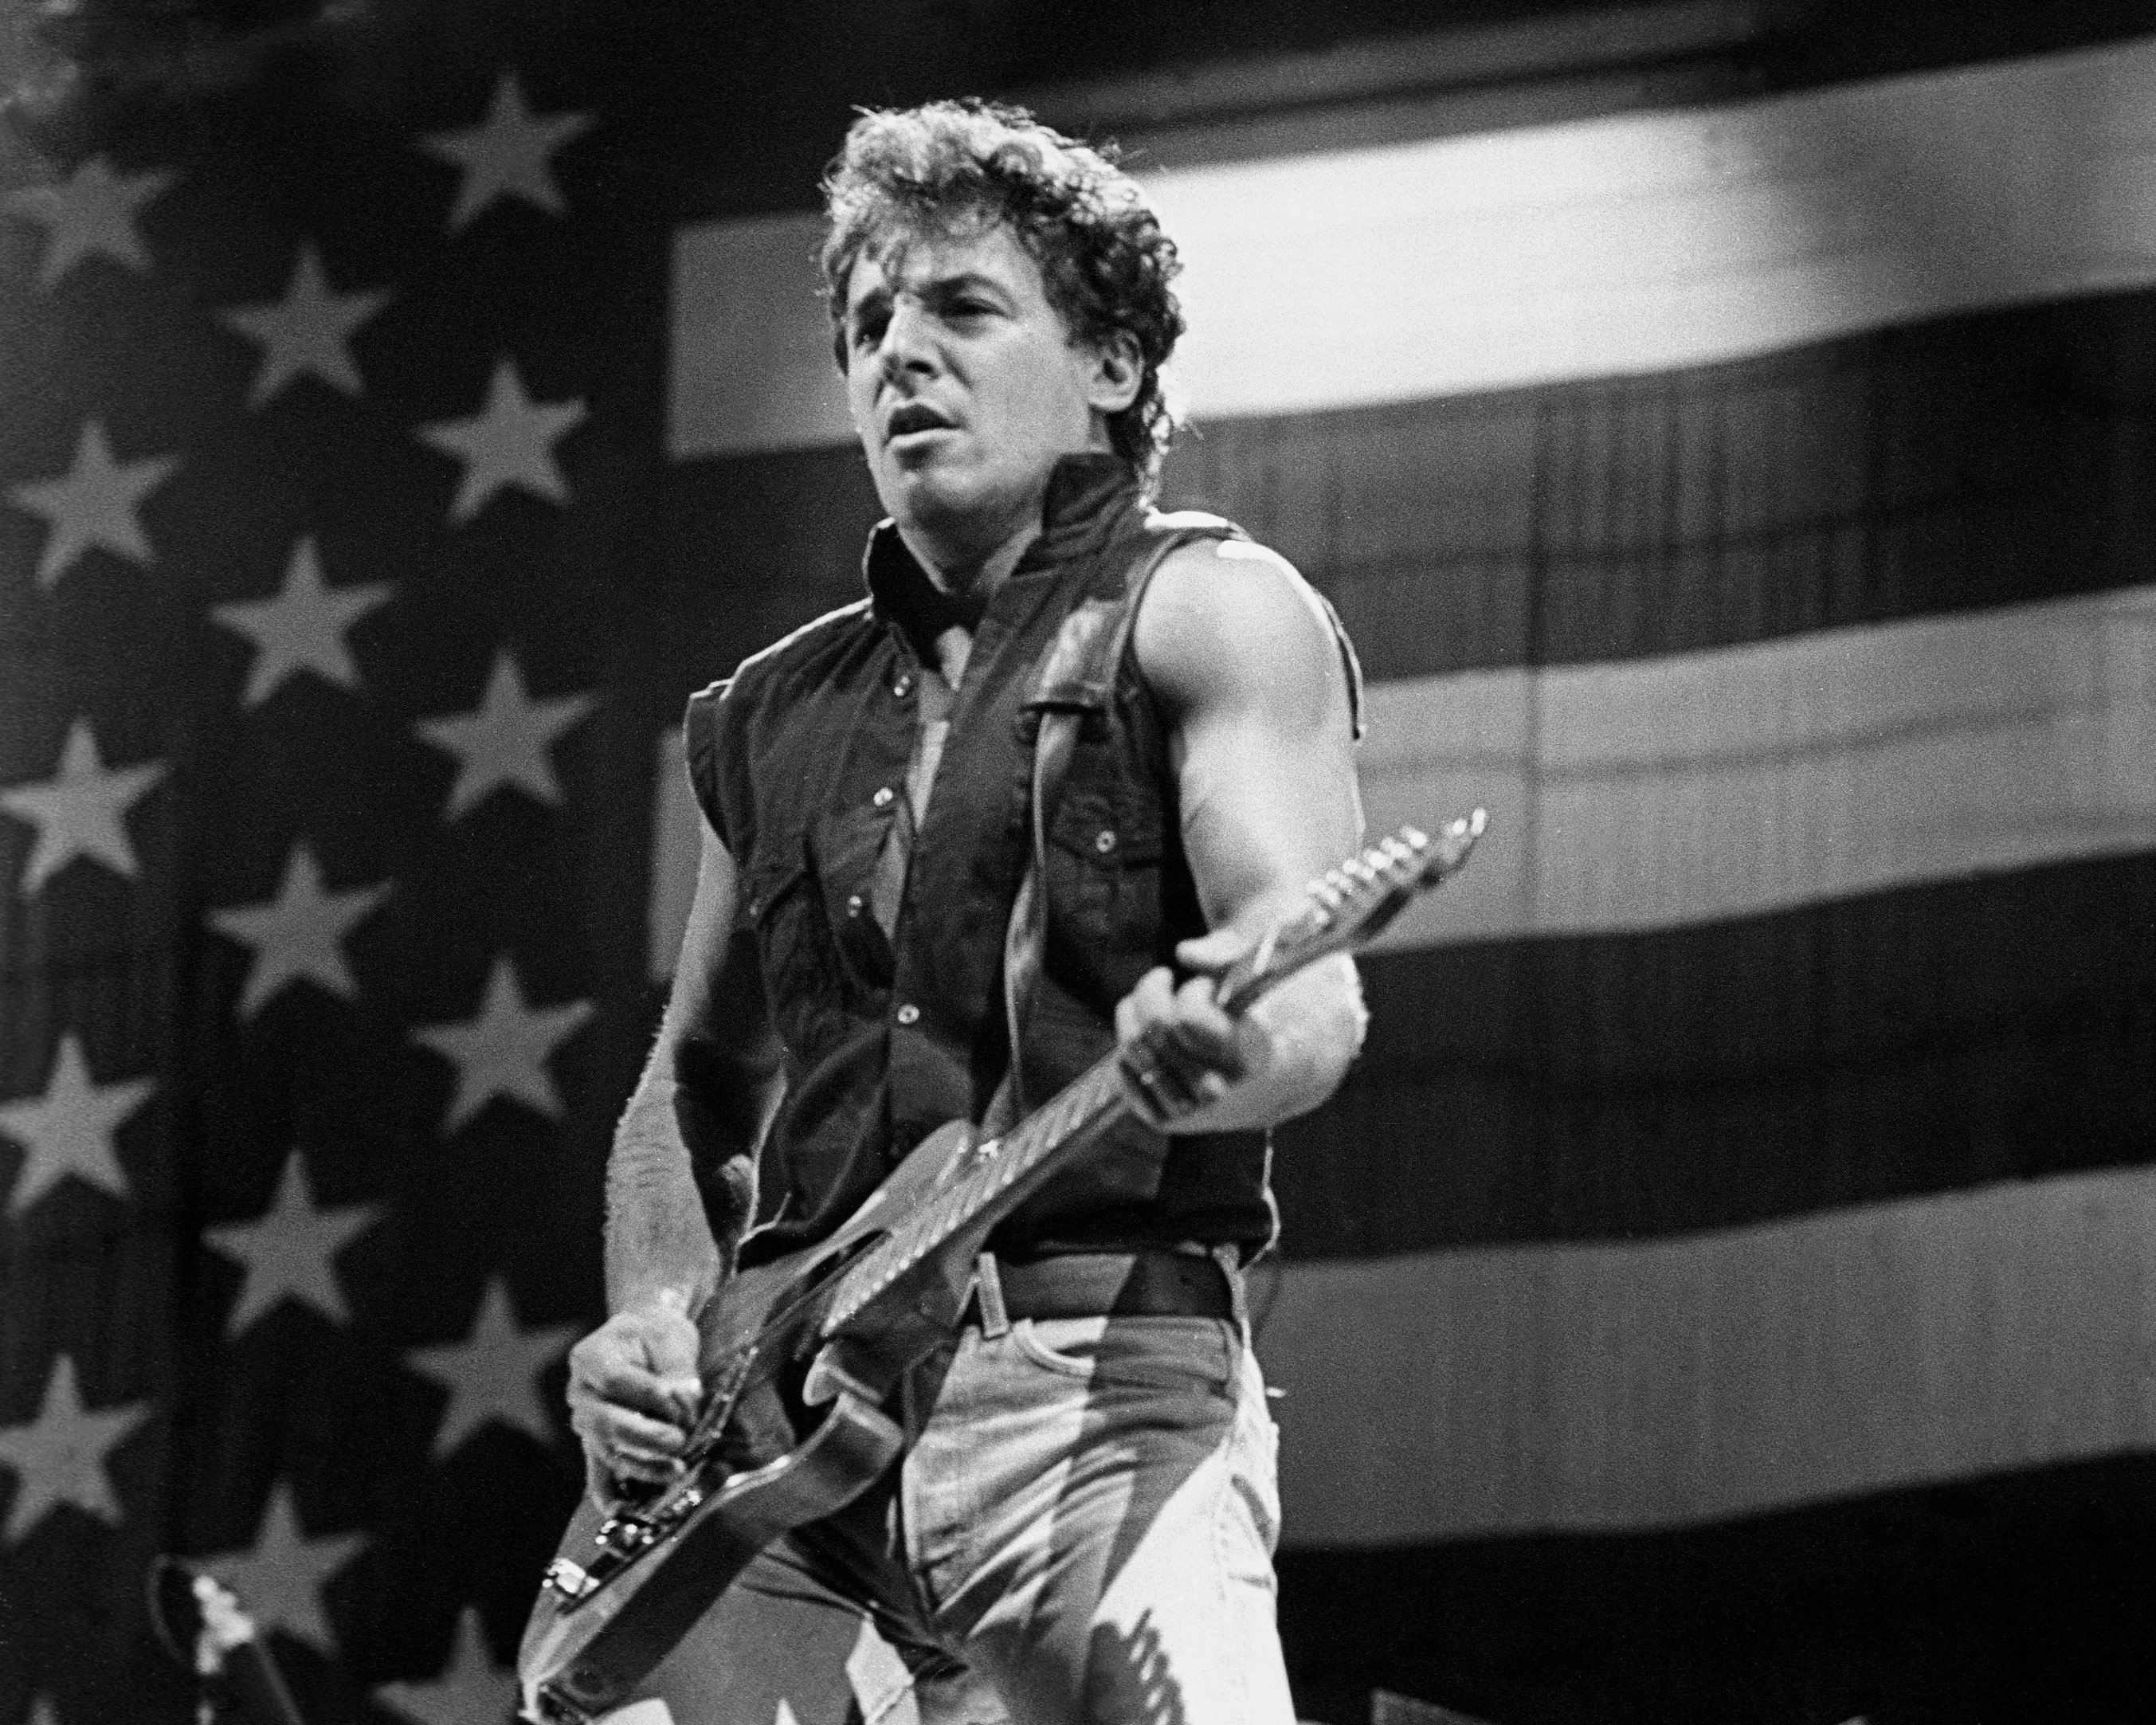 Bruce Springsteen performing with the E Street Band at the Oakland Stadium